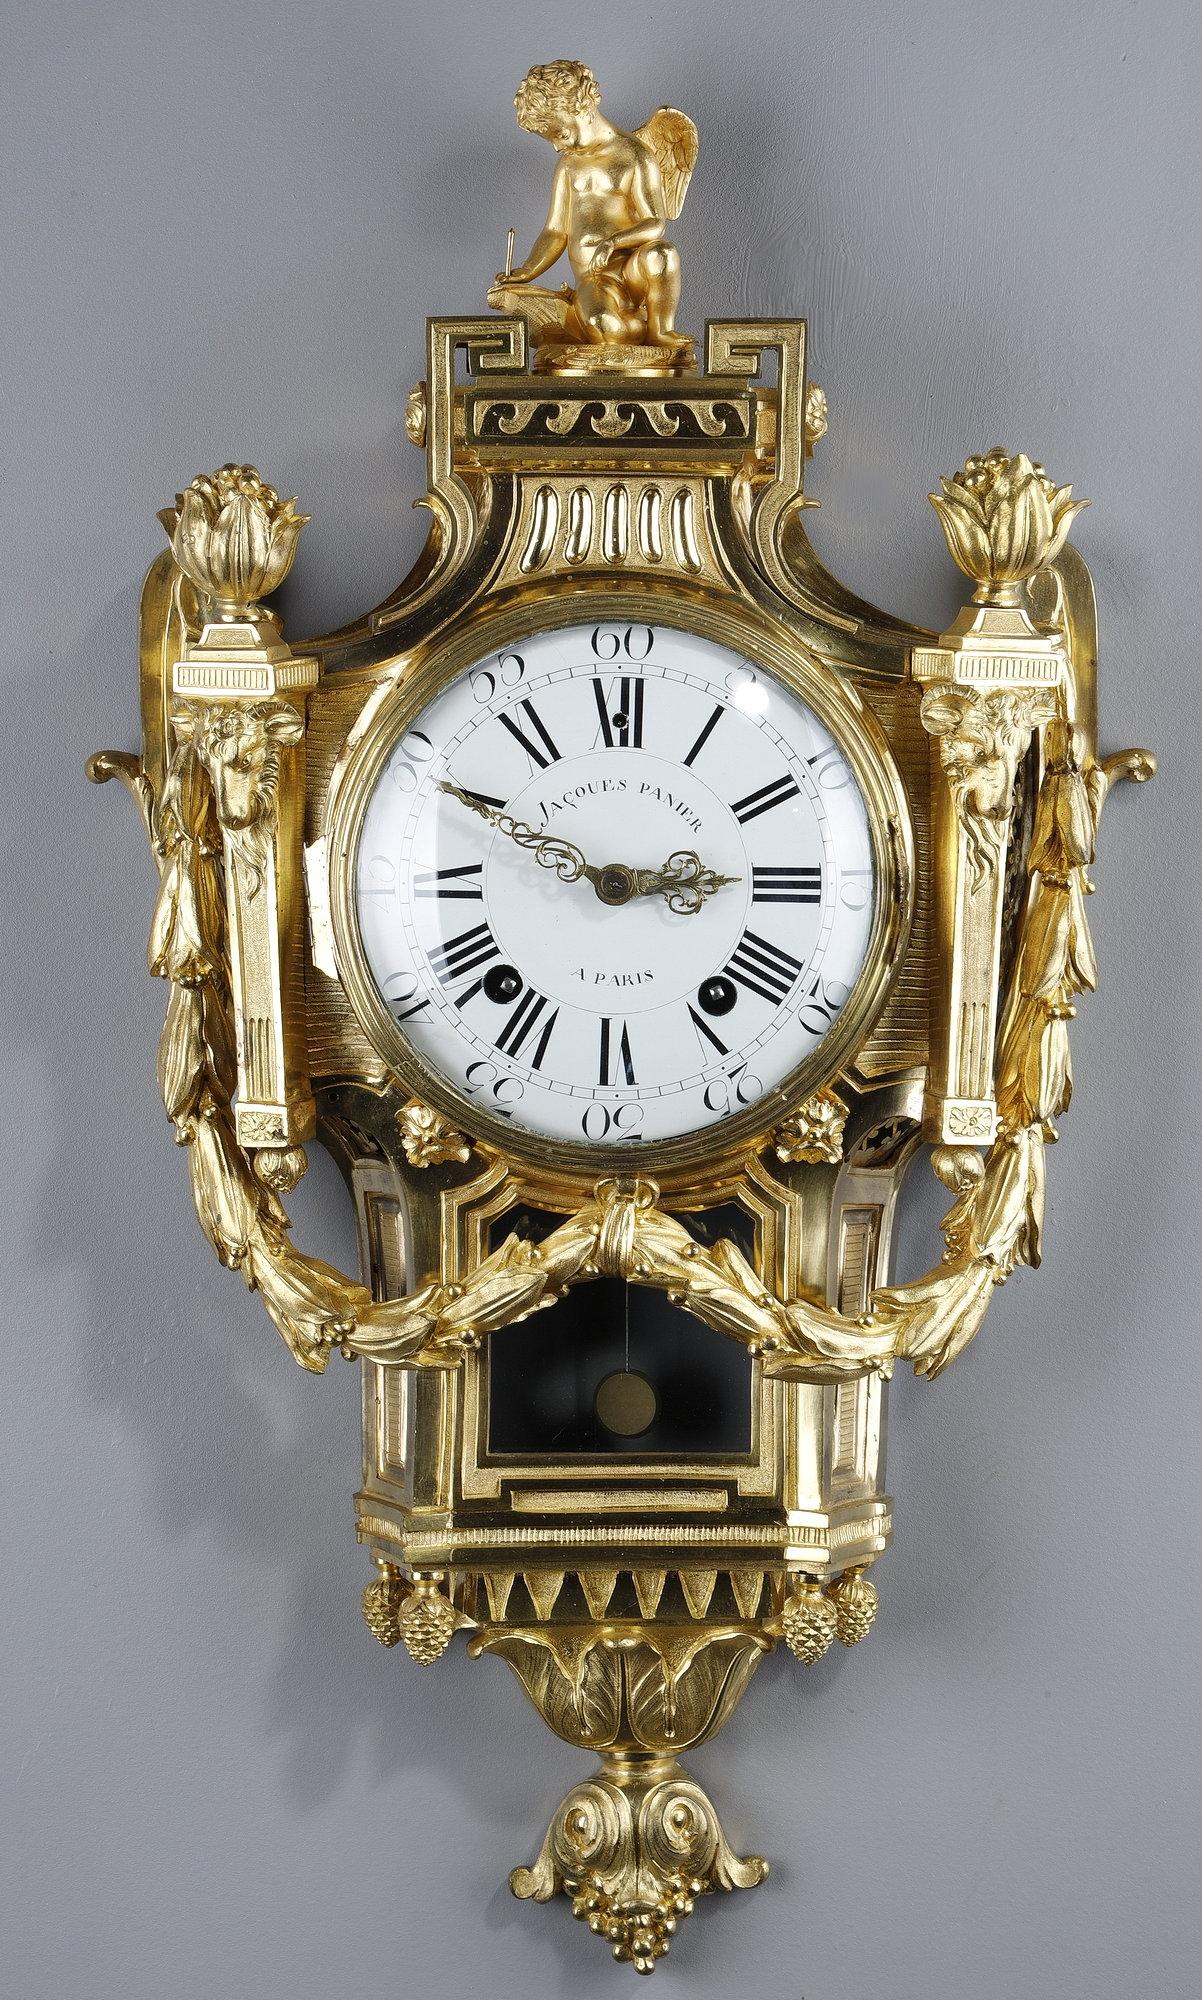 Large Louis XVI period gilt and chased bronze wall clock, signed Jacques PANIER in Paris. The body of this clock is in the form of an architectural cartouche, with a ribbed or fluted base, a molded bezel, framed by two sheaths with goat heads and